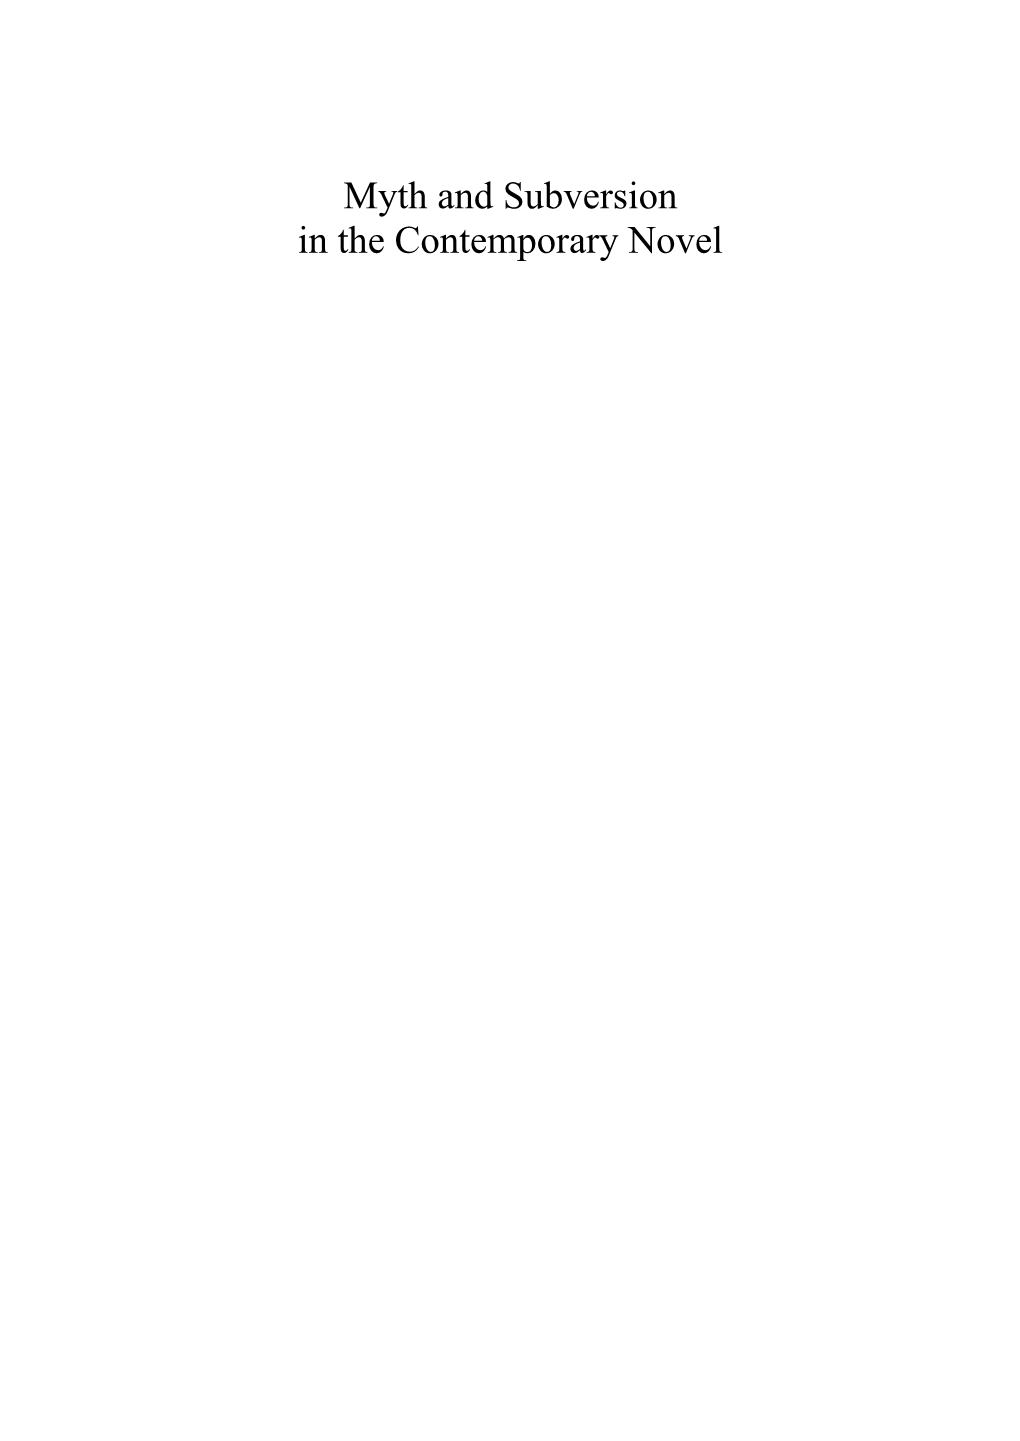 Myth and Subversion in the Contemporary Novel